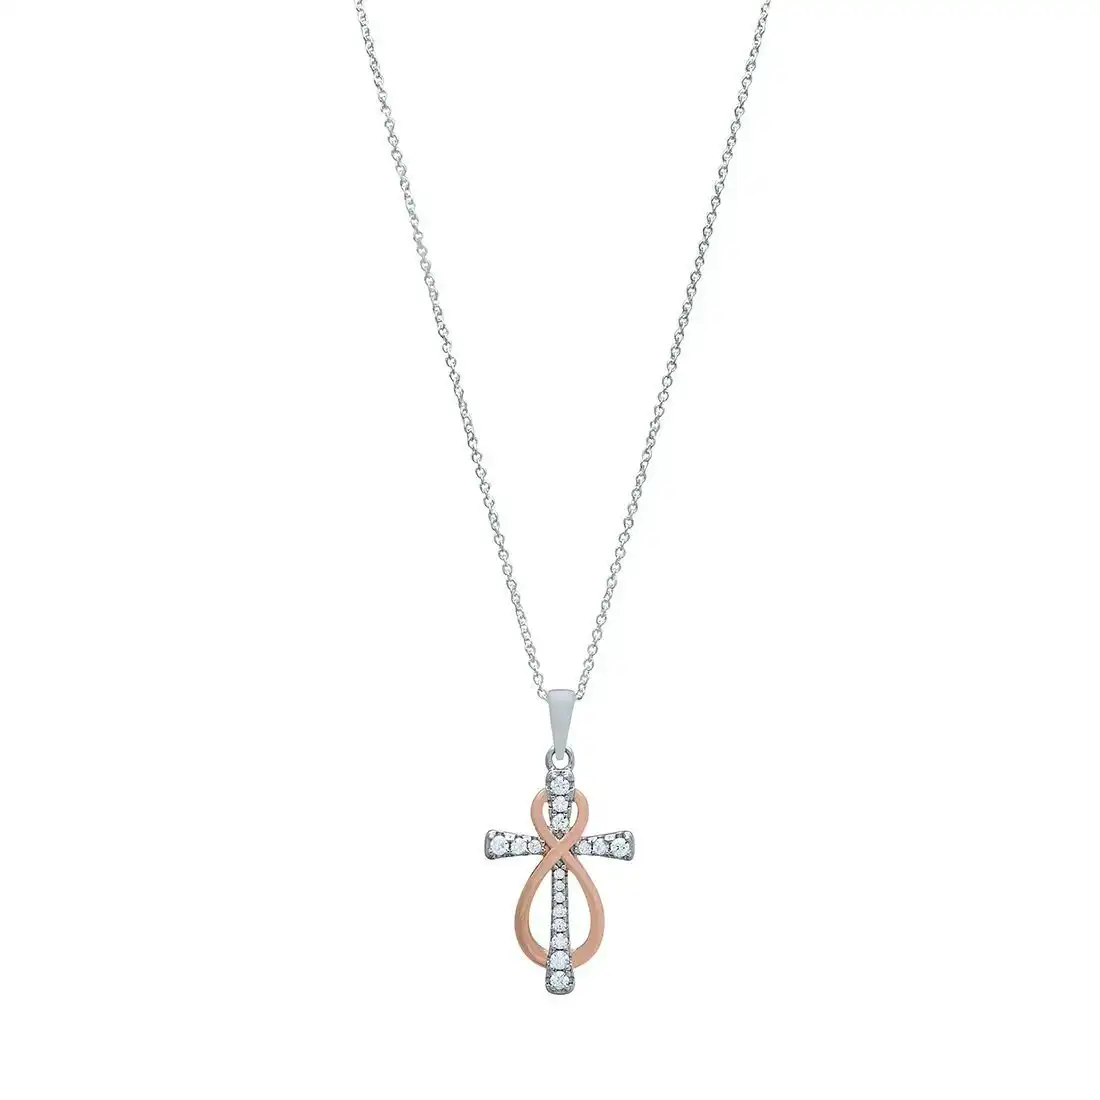 45cm Cross & Infinity Necklace in Sterling Silver